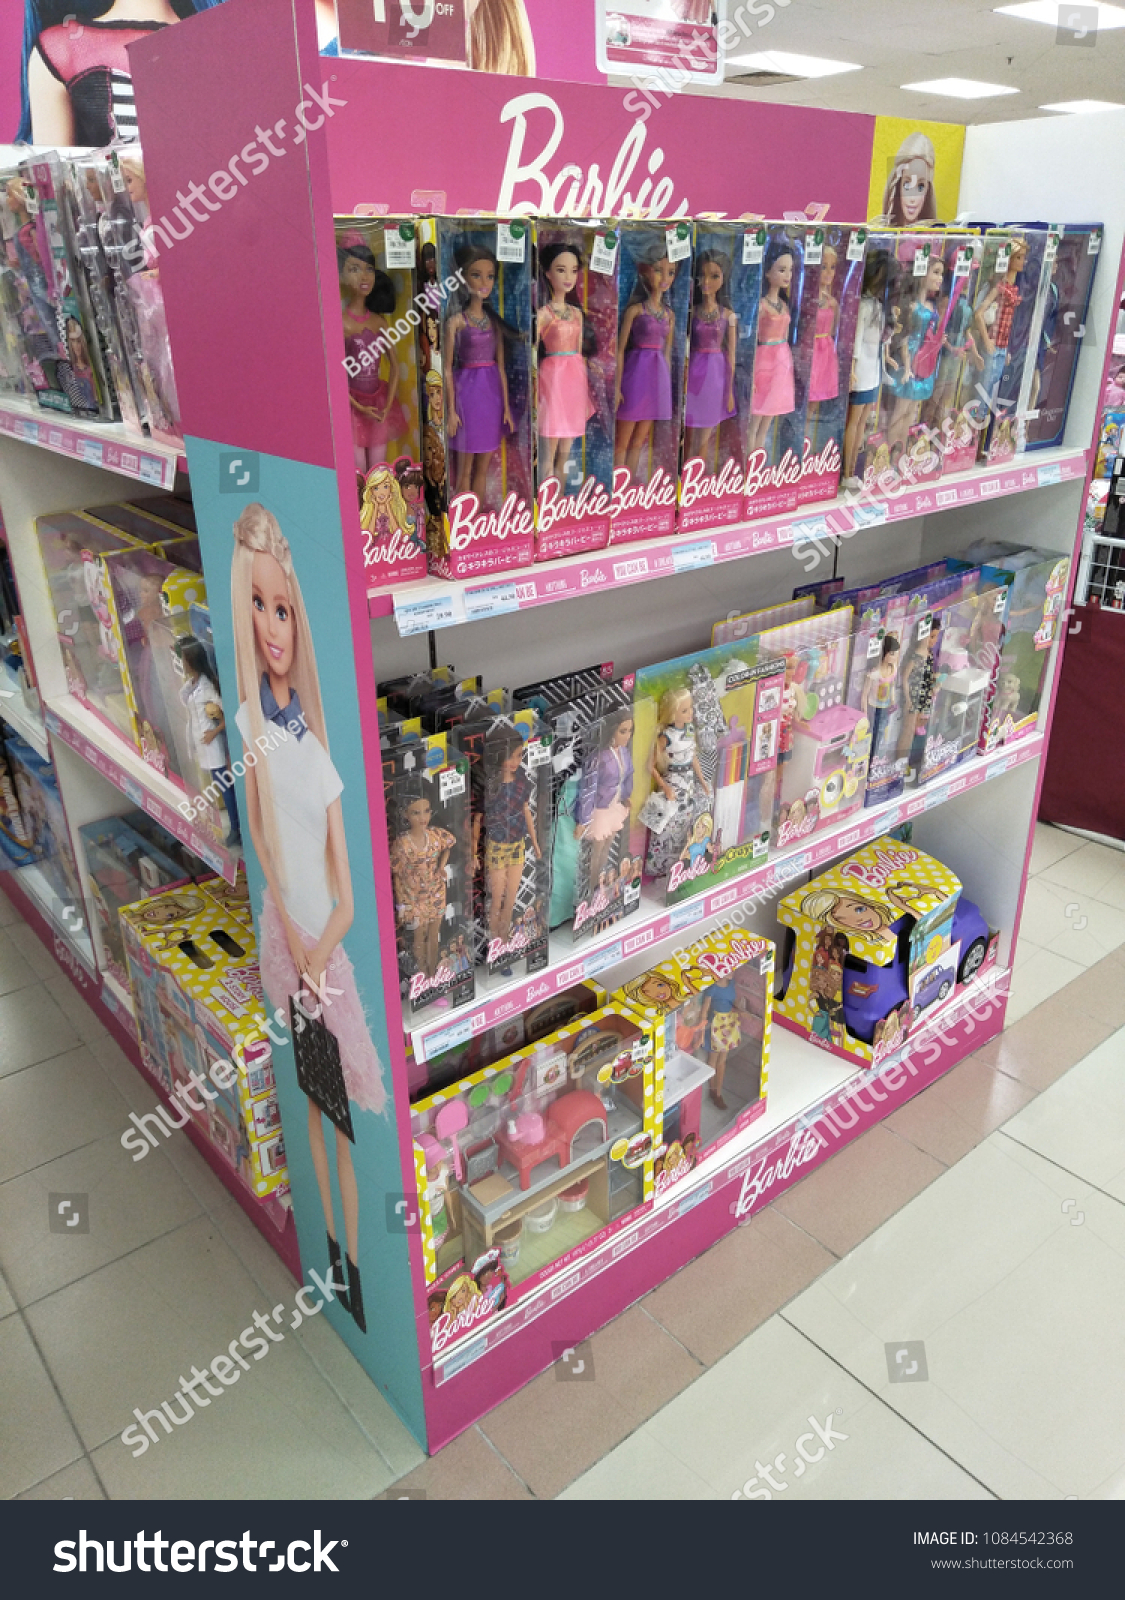 barbie go to shopping mall